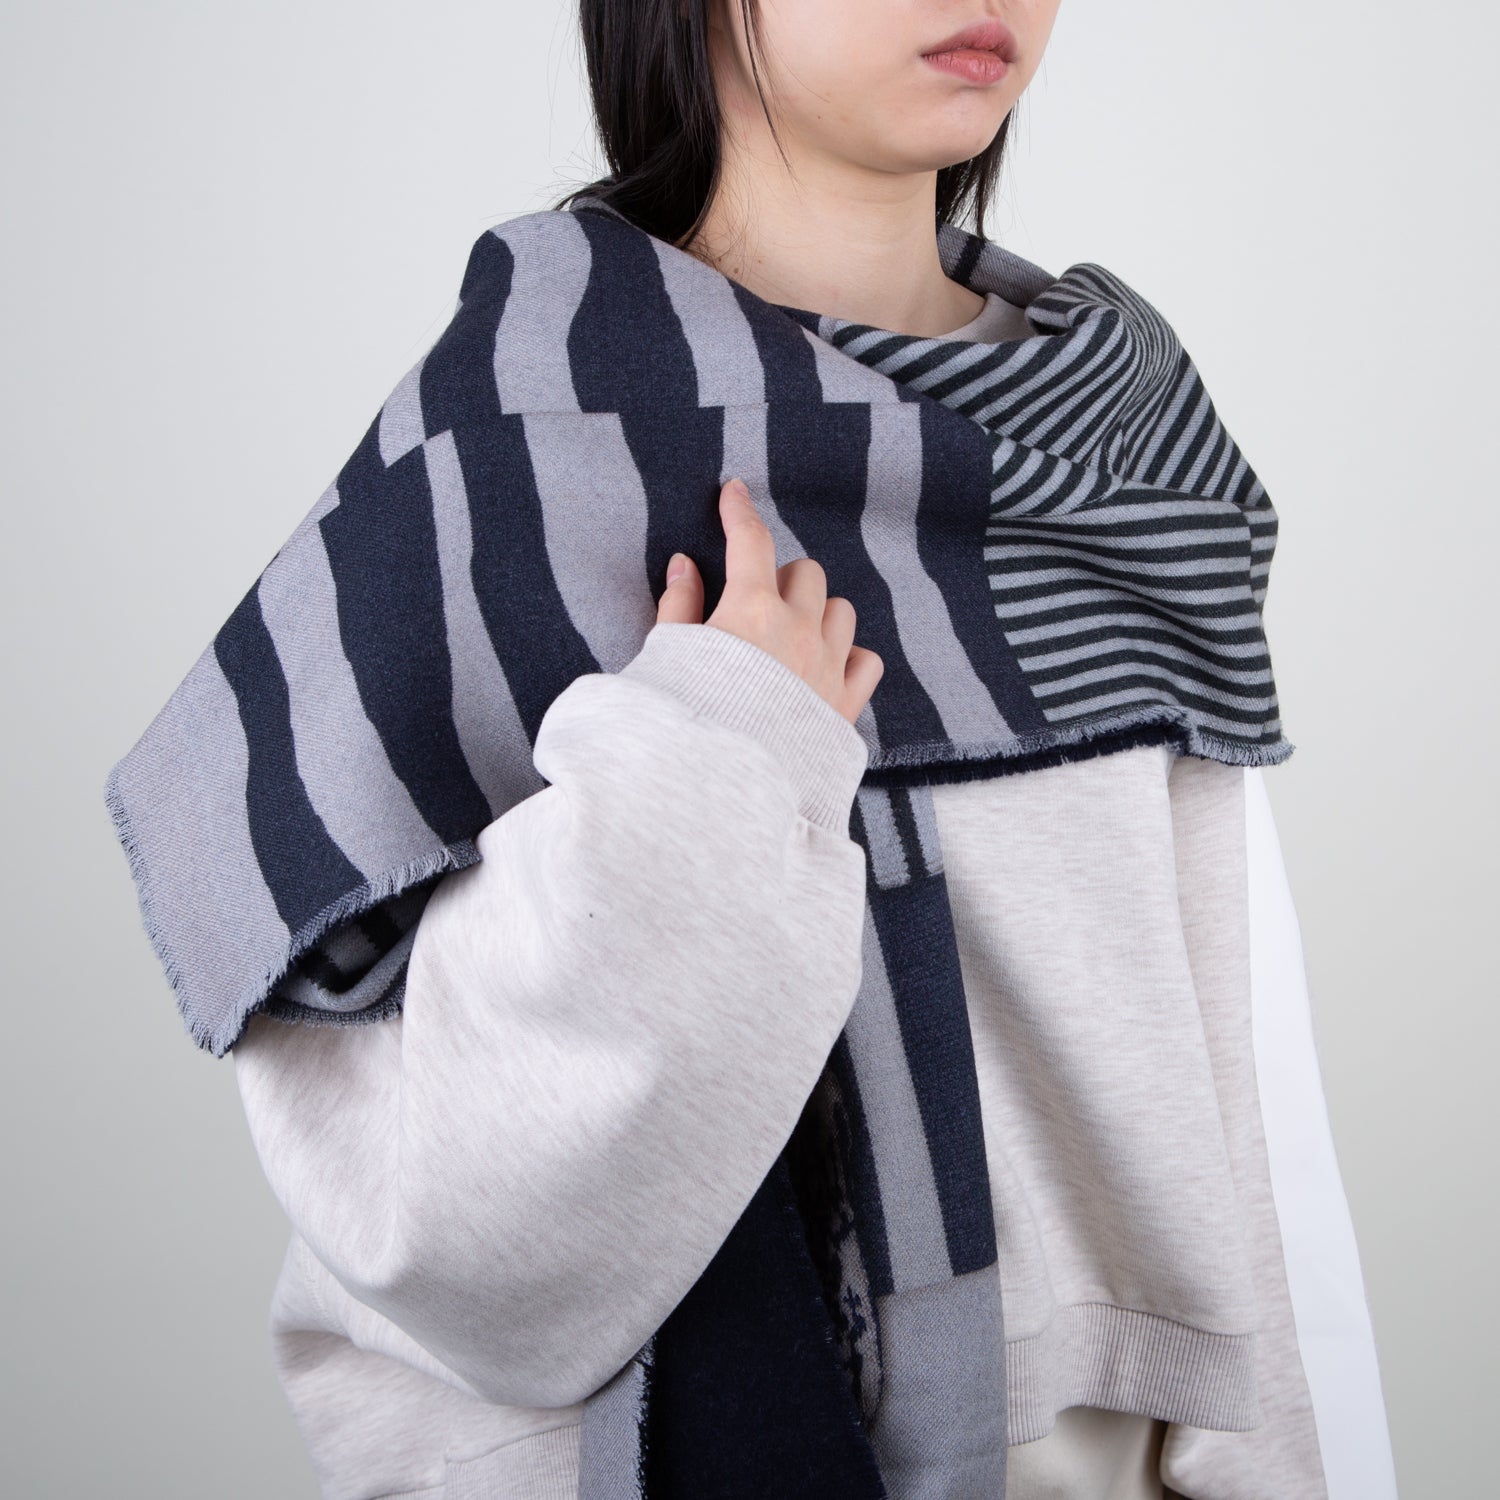 wool printed scarf in navy and grey luxury design